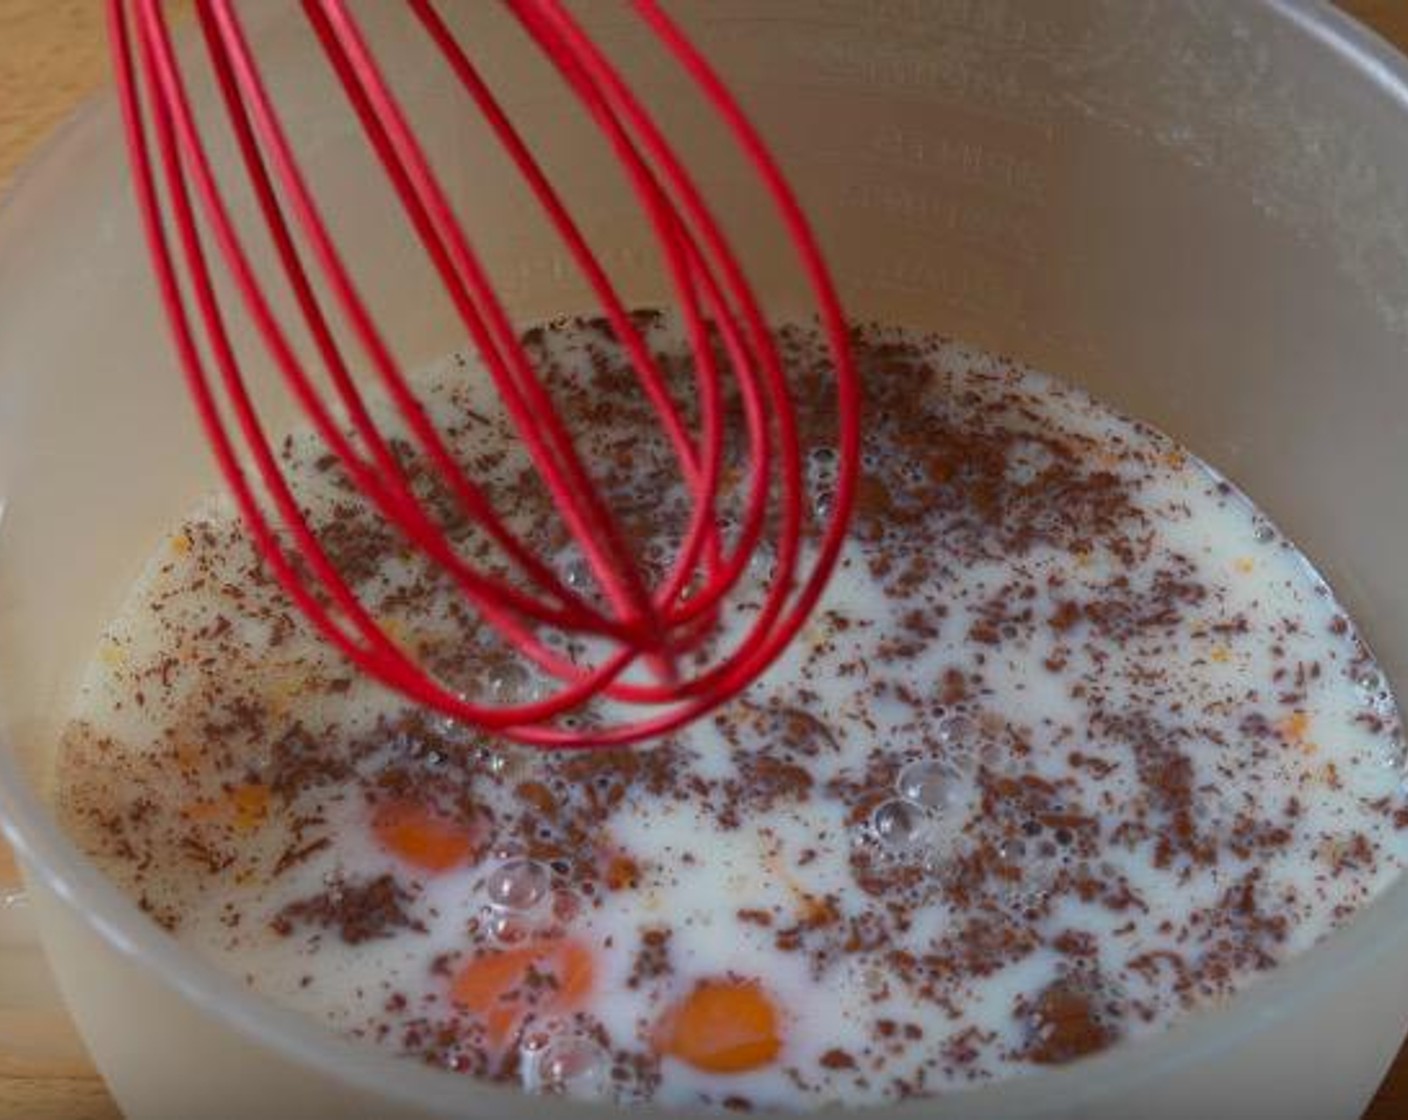 step 2 In a mixing jug, add Eggs (6), Brown Sugar (1 Tbsp), Ground Cinnamon (1 tsp), Vanilla Extract (1 tsp) and Milk (2 cups). Whisk everything together until smooth.